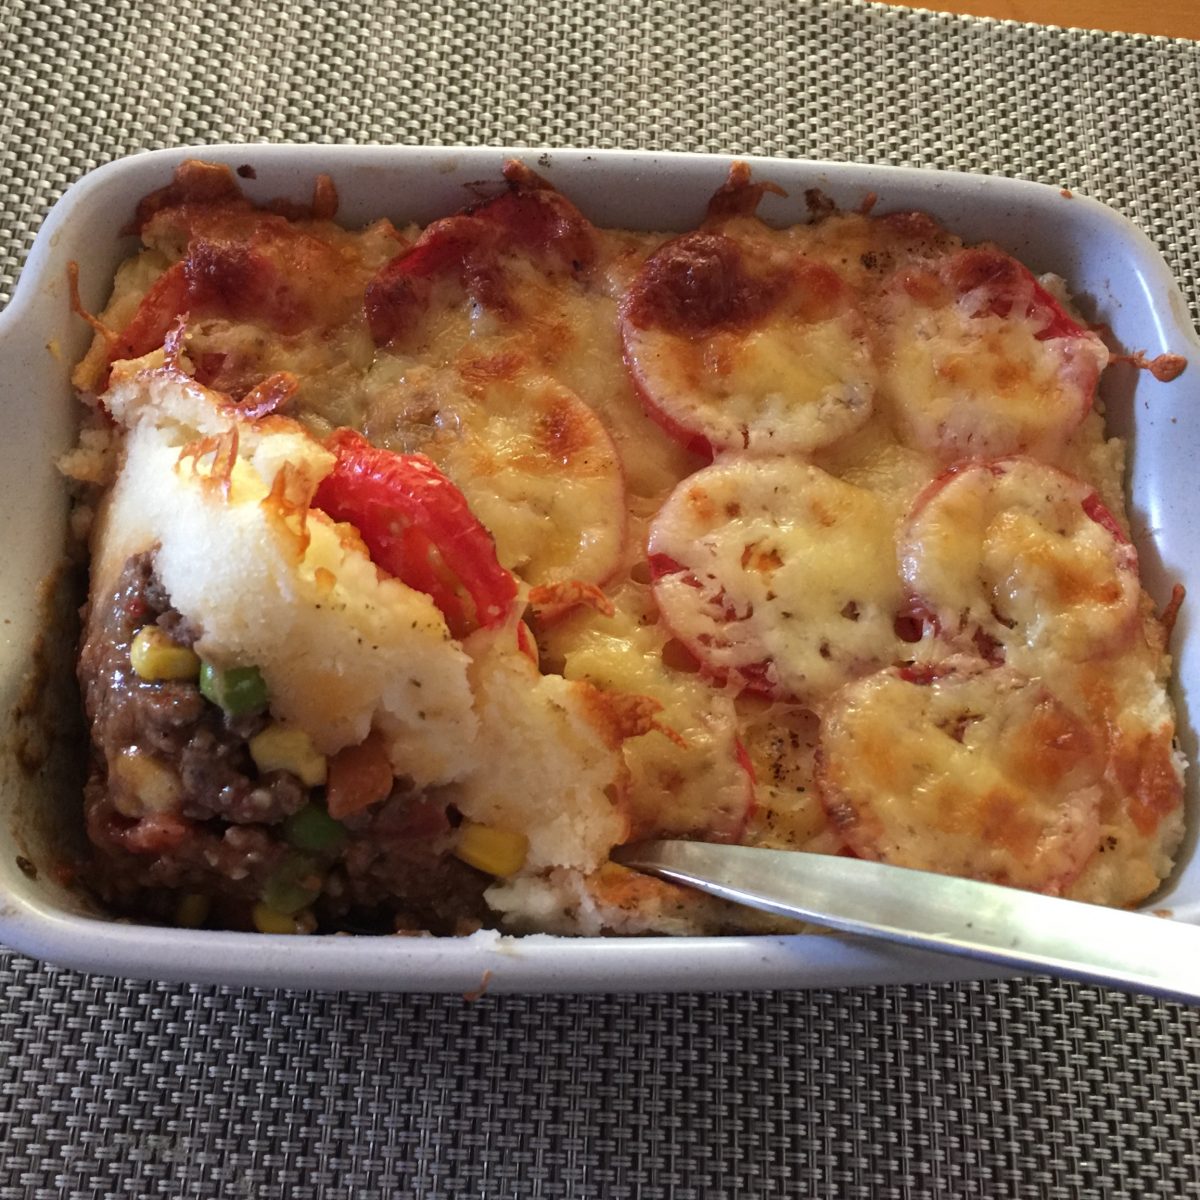 Beef shepherd's pie, savoury beef and vegetables topped with mashed potato - sliced tomatoes and melted cheese